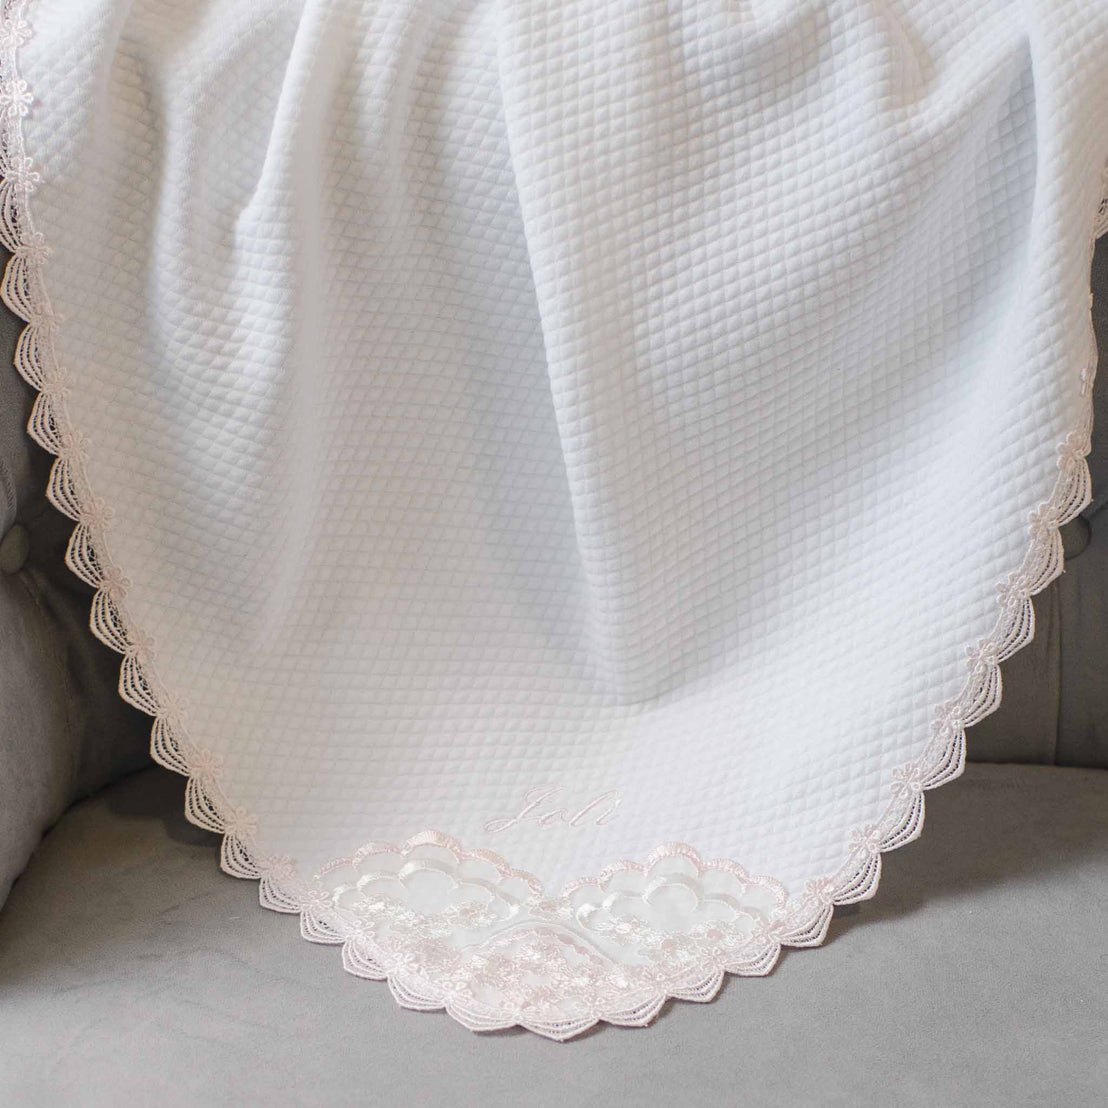 White Joli Personalized Blanket with intricate lace detailing and the word "faith" embroidered near the hem, displayed on a soft gray background.